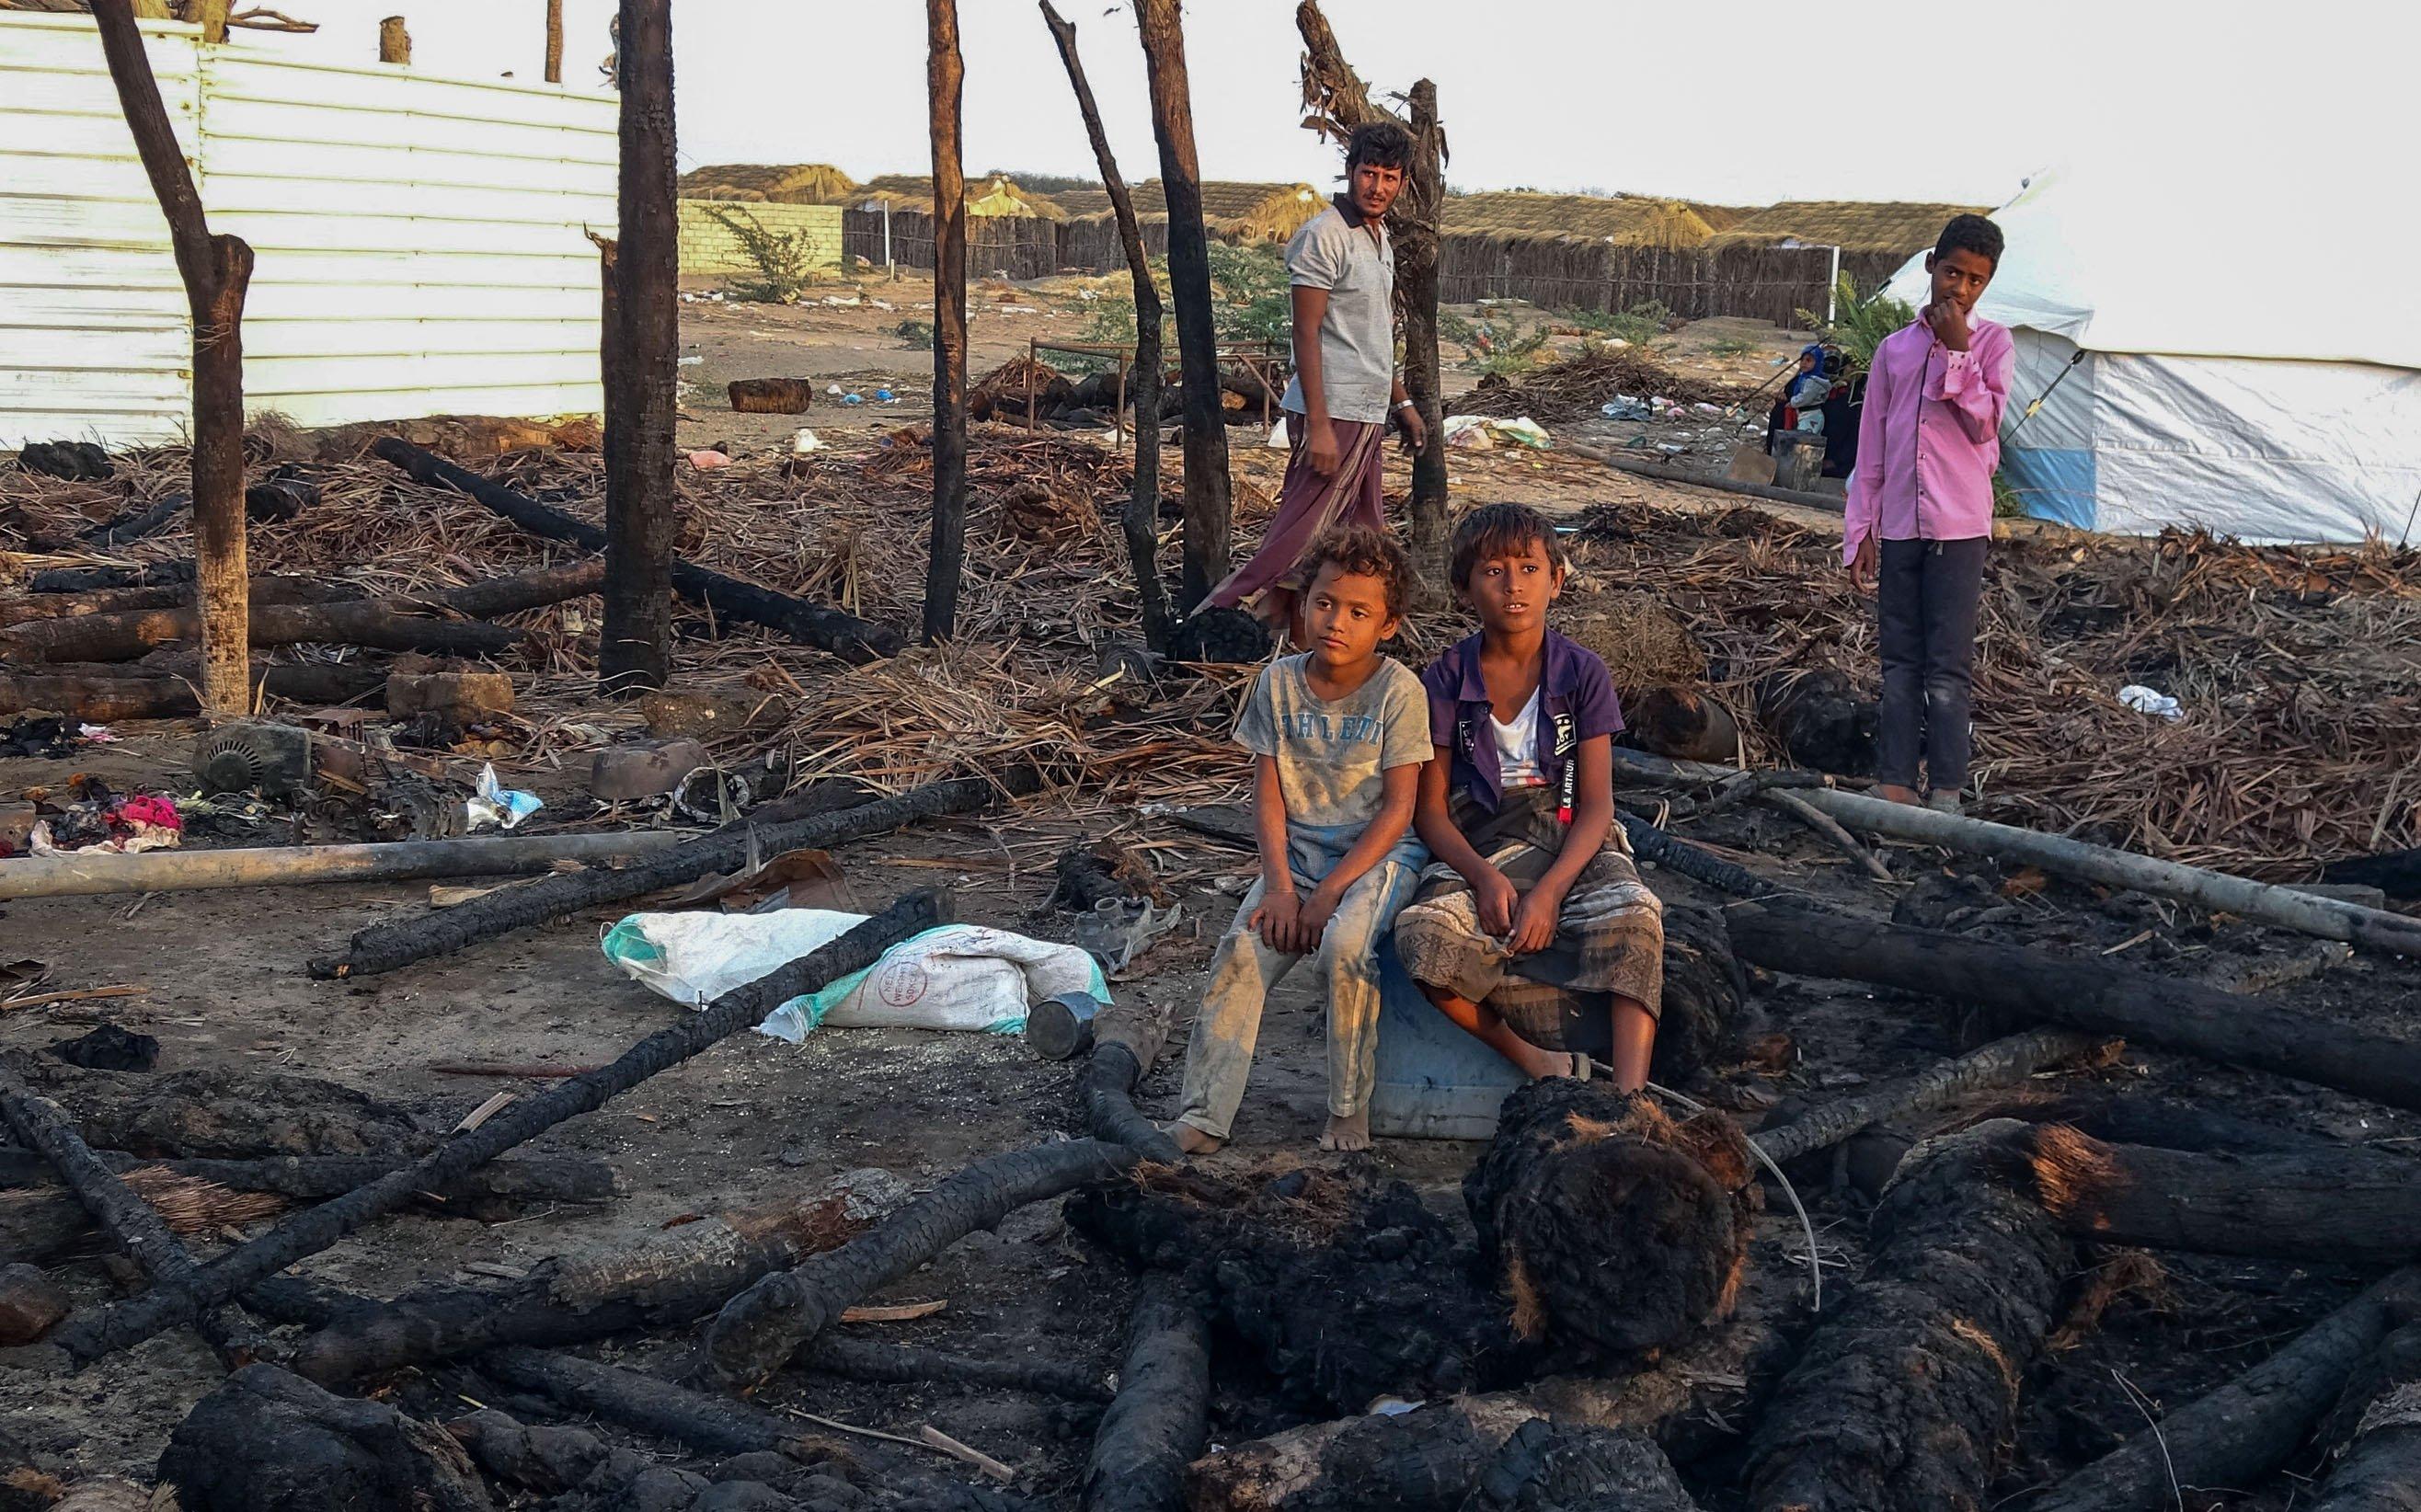 Displaced Yemen youths sit by a calcined wooden pols after a fire broke out - Avaz